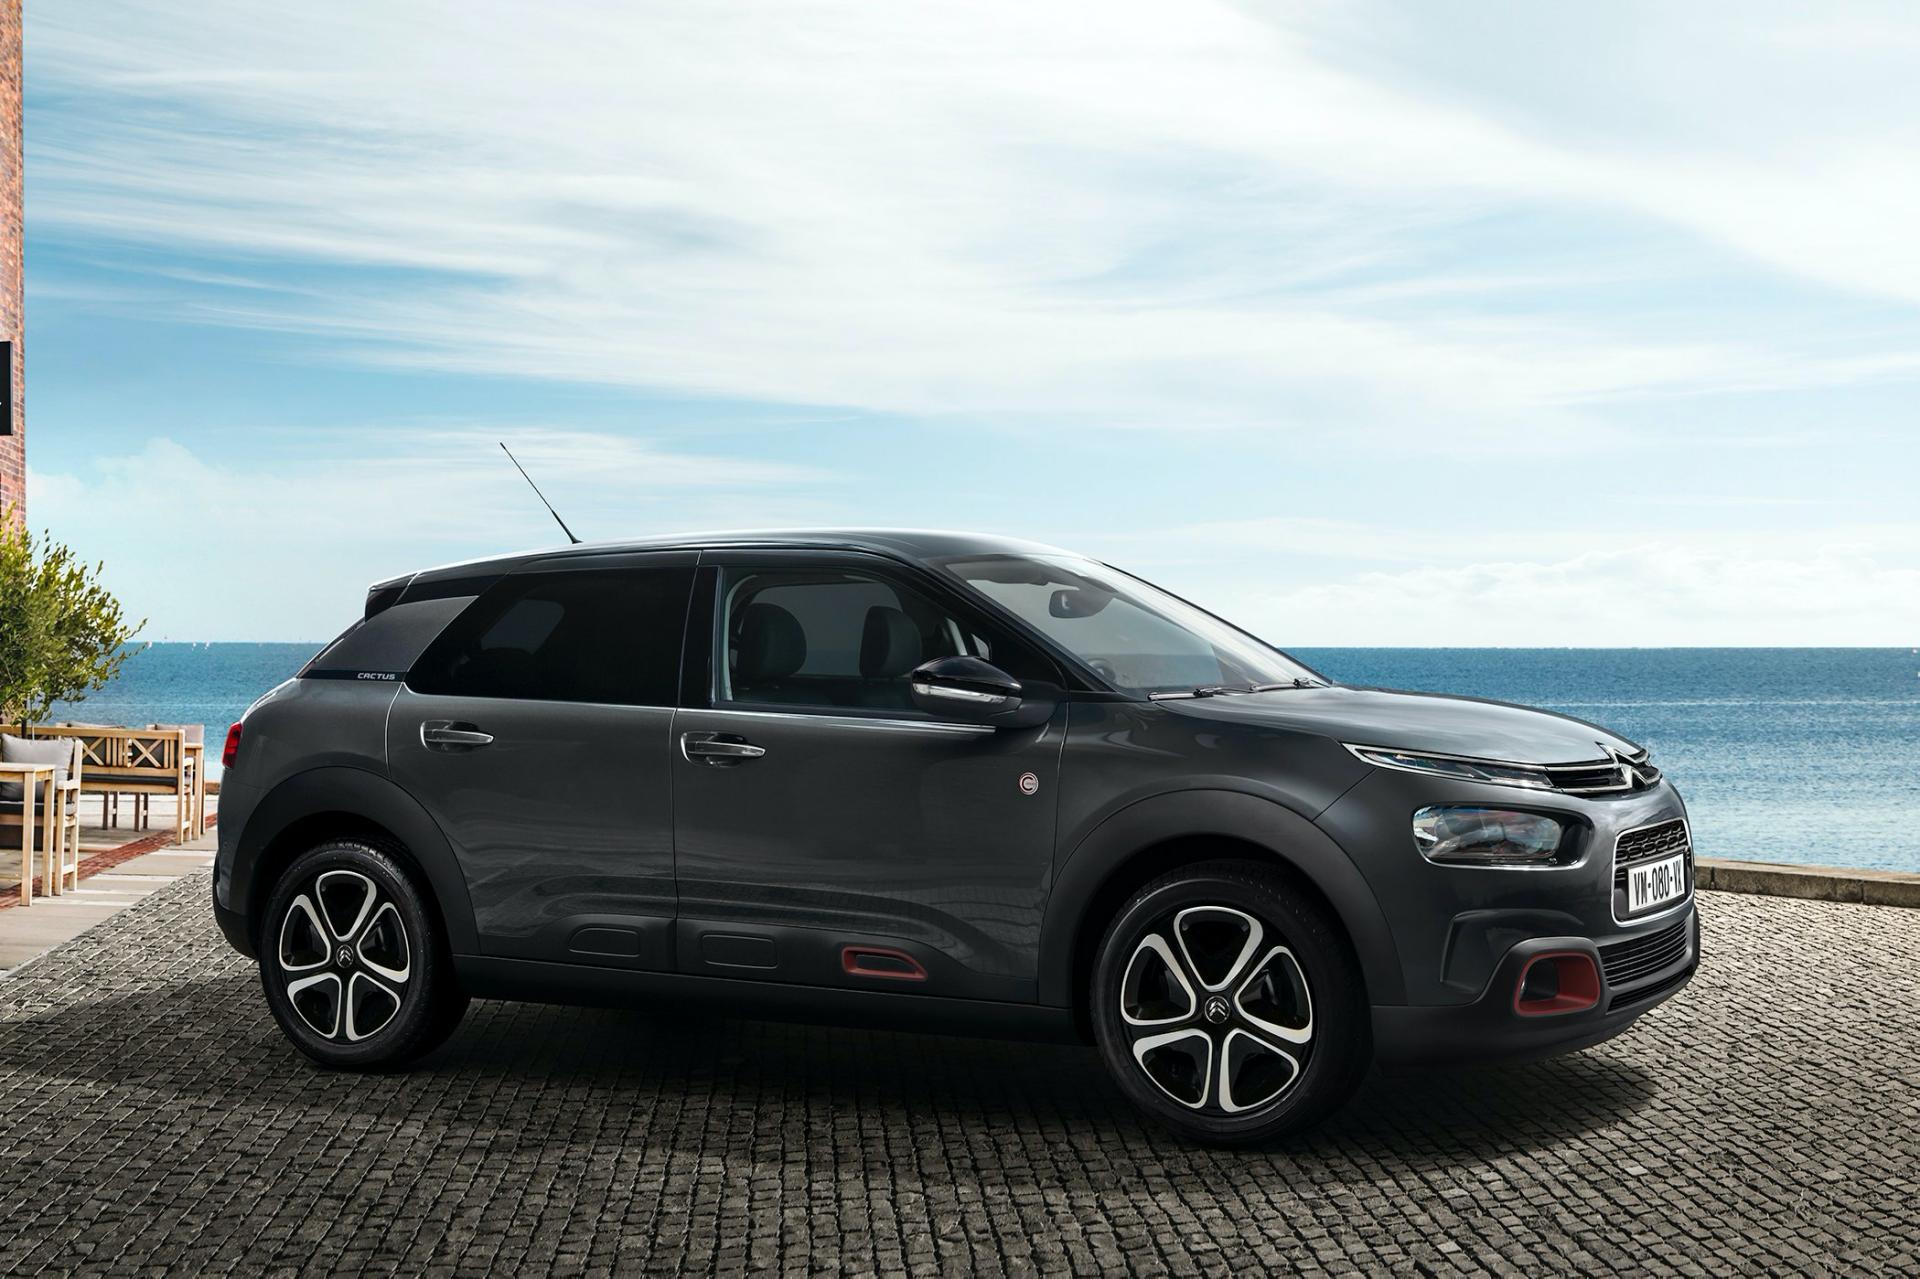 Citroën C4 Cactus Given 'C-Series' Special Edition Treatment For 2020